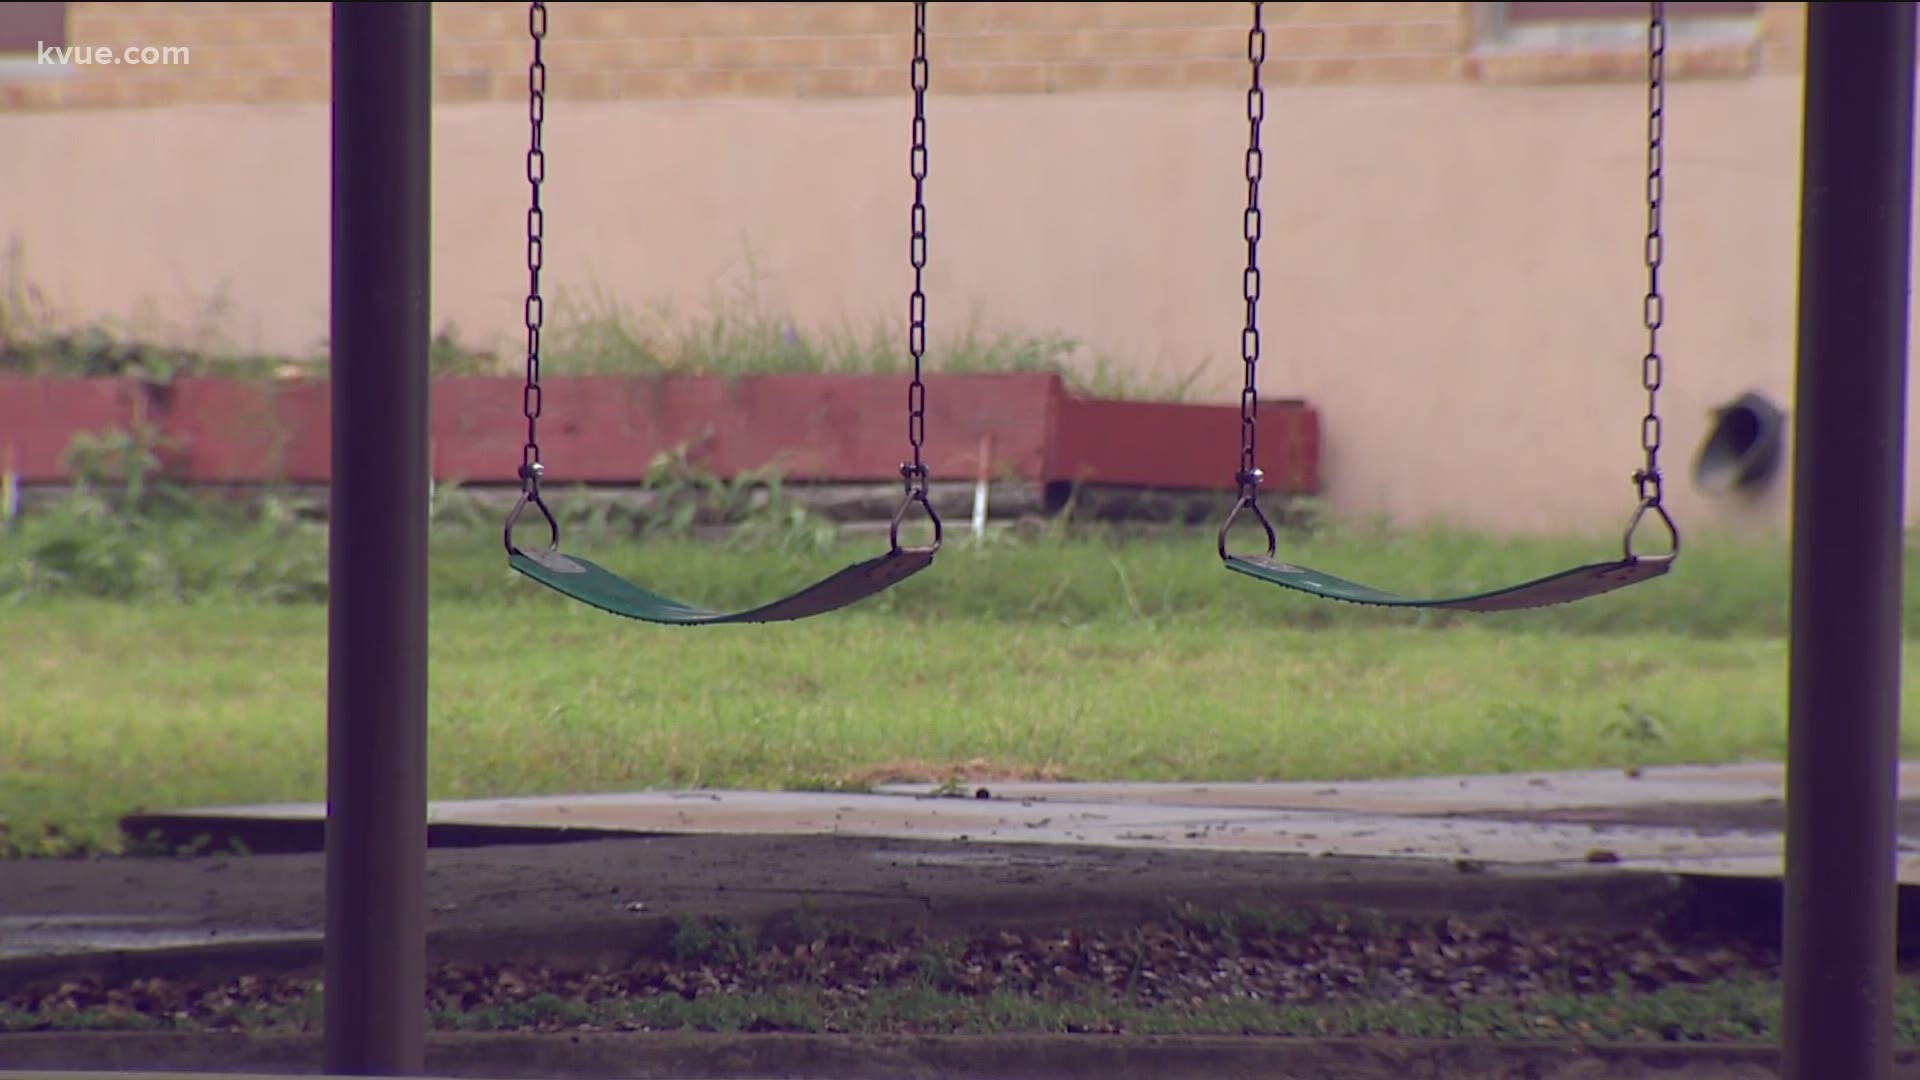 Many educators are concerned about the guidelines the Texas Education Agency released for reopening schools in the fall.